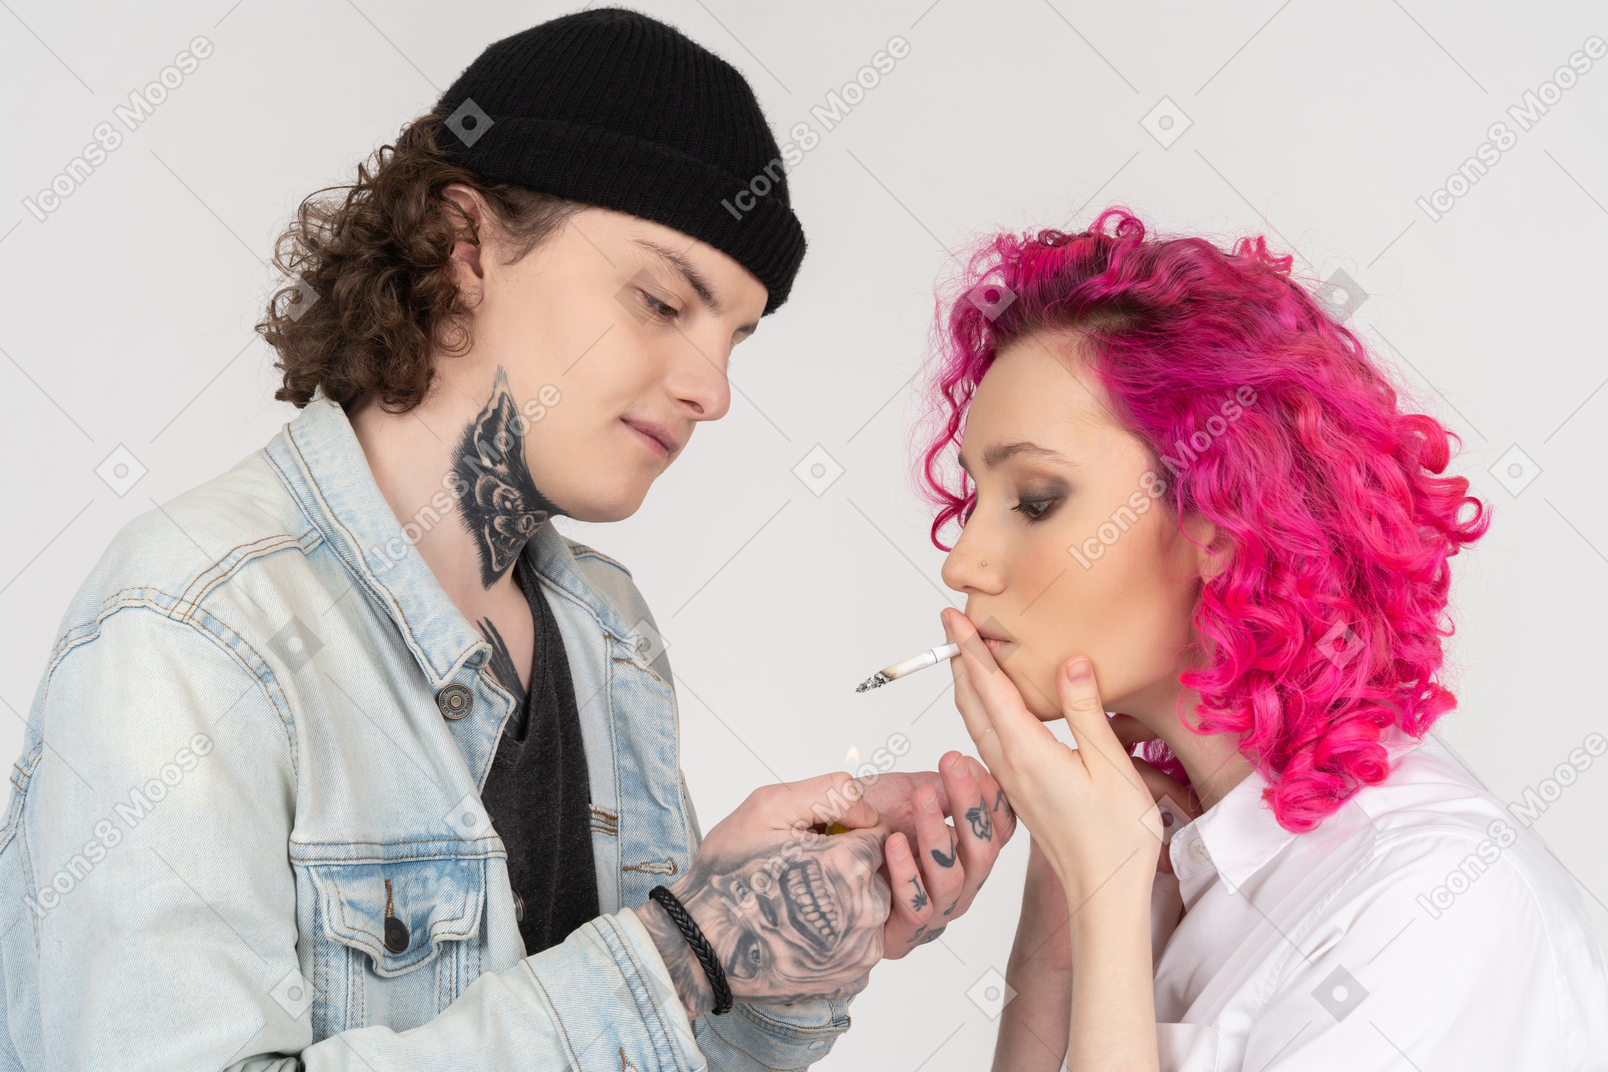 Male teenager giving a smoke to his girlfriend